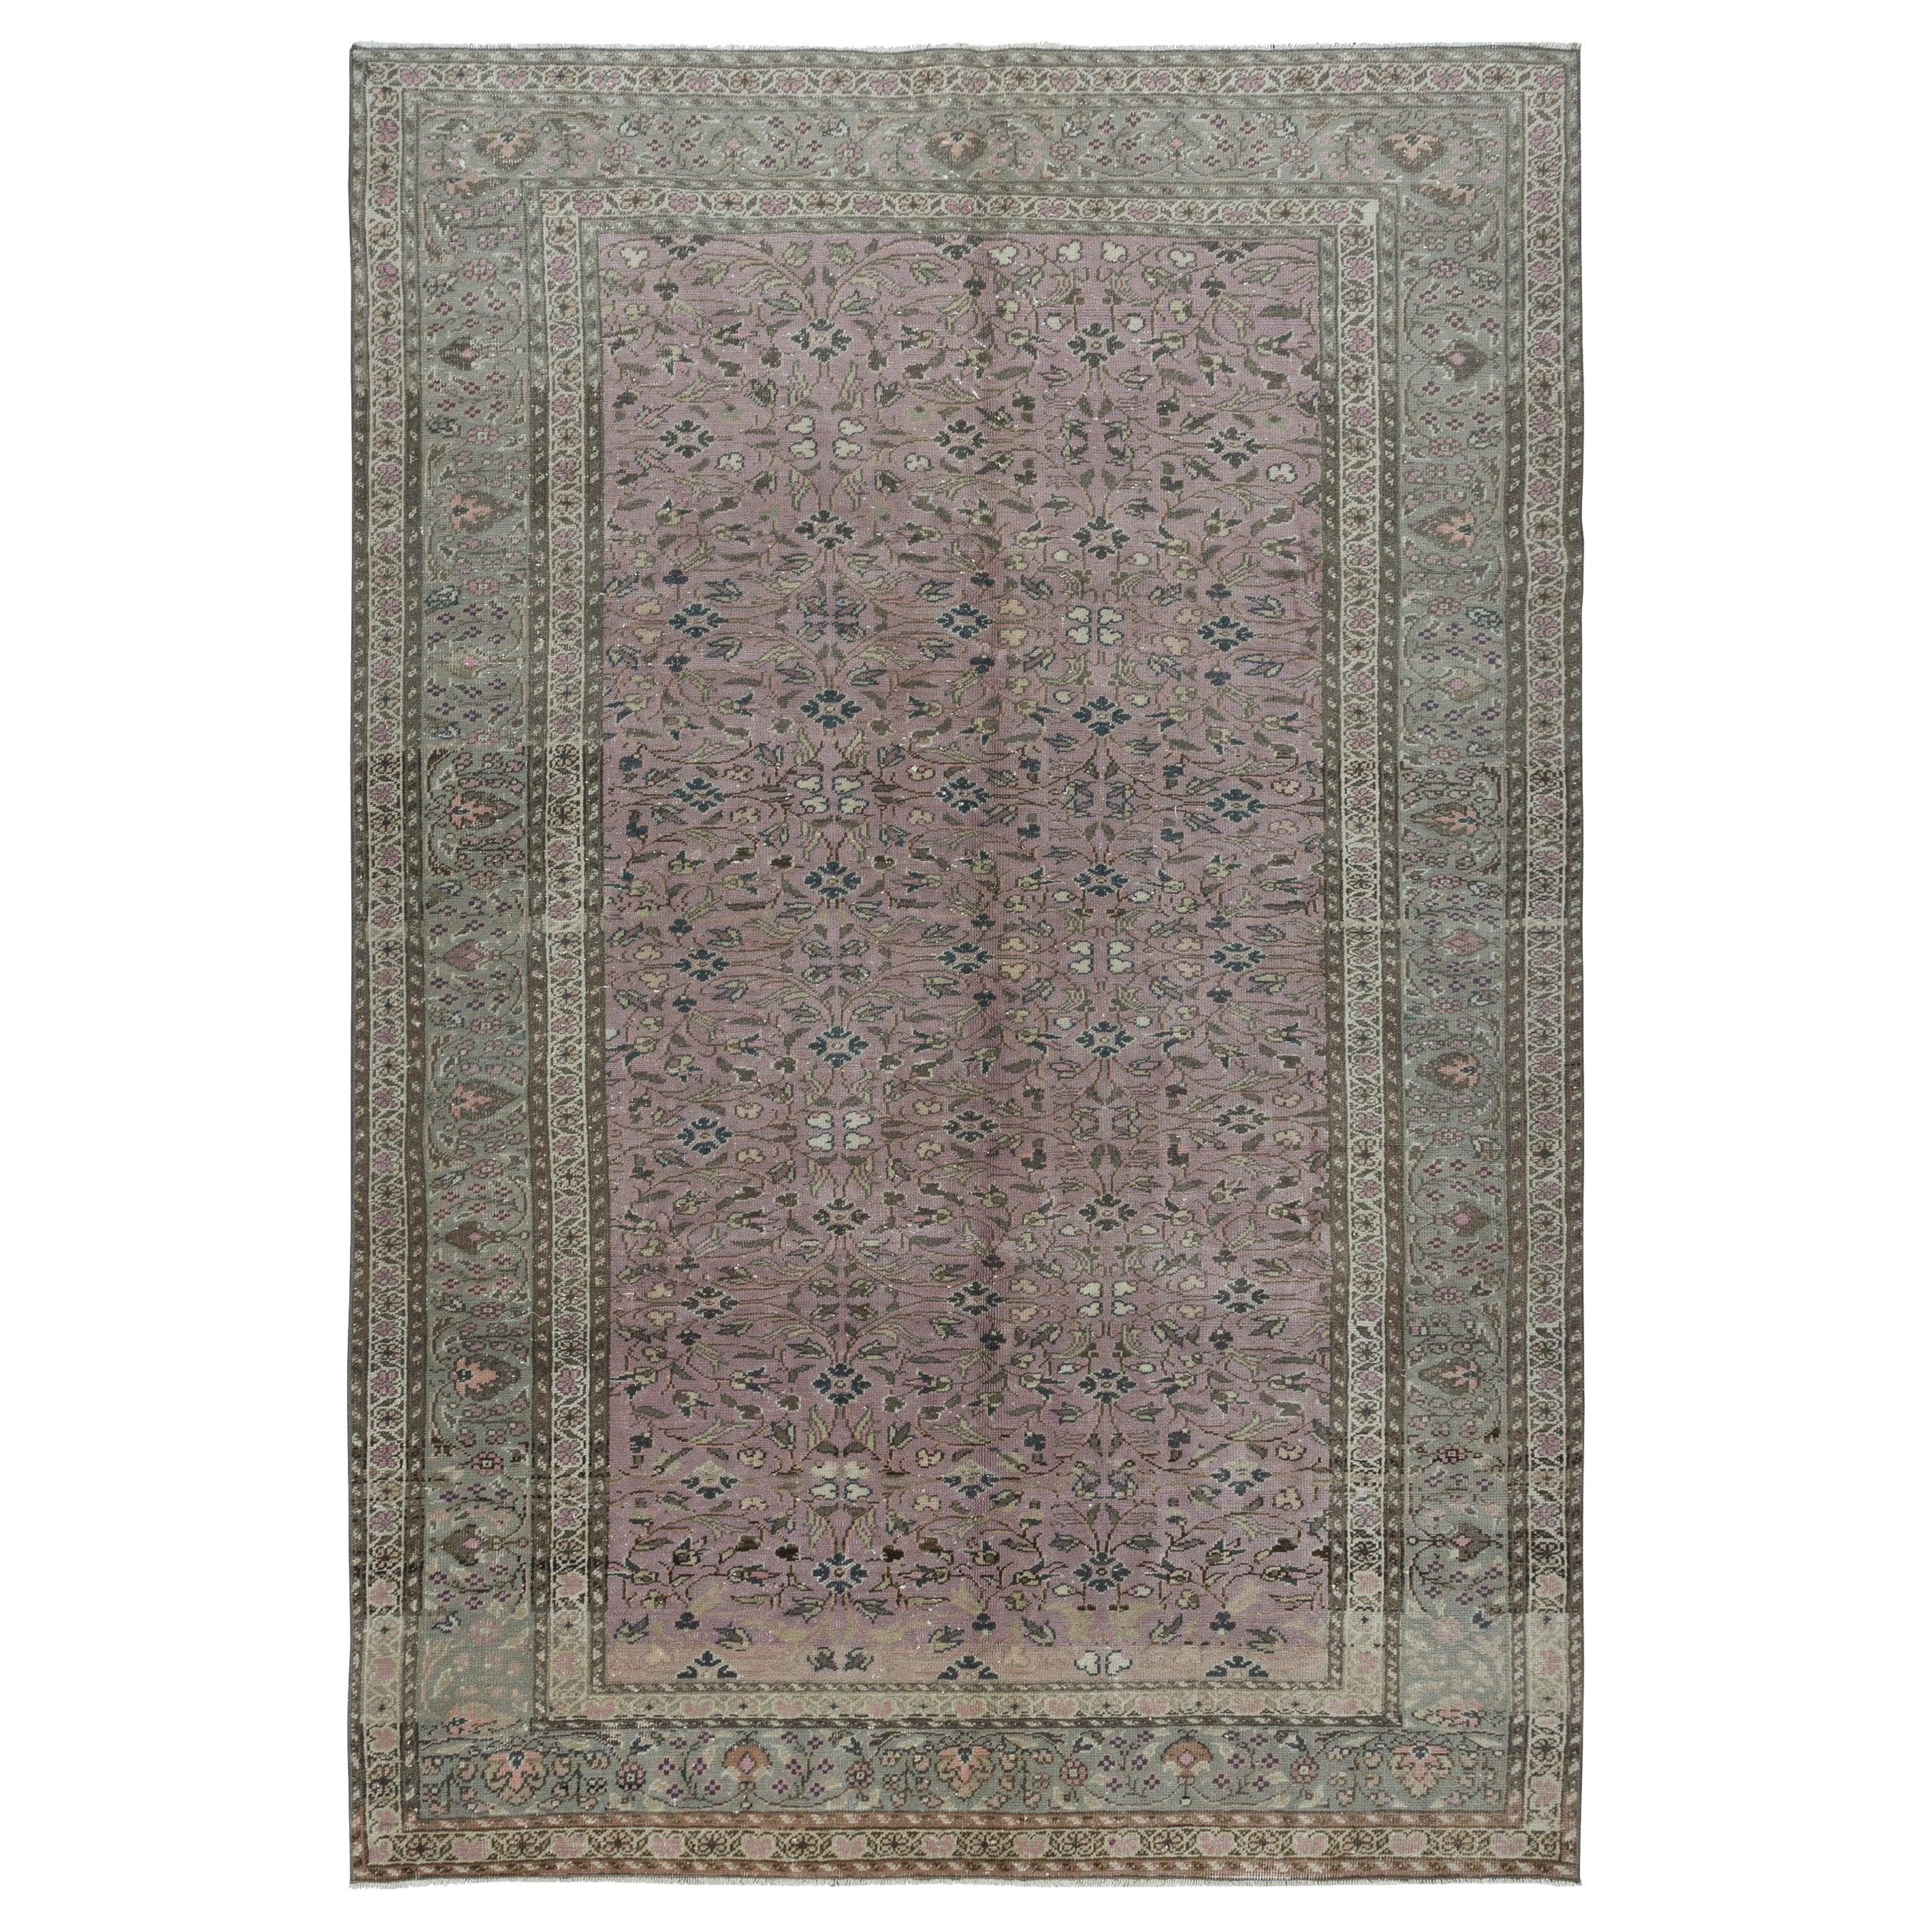 5.5x8.2 Ft Traditional Vintage Handmade Turkish Area Rug with Floral Design For Sale